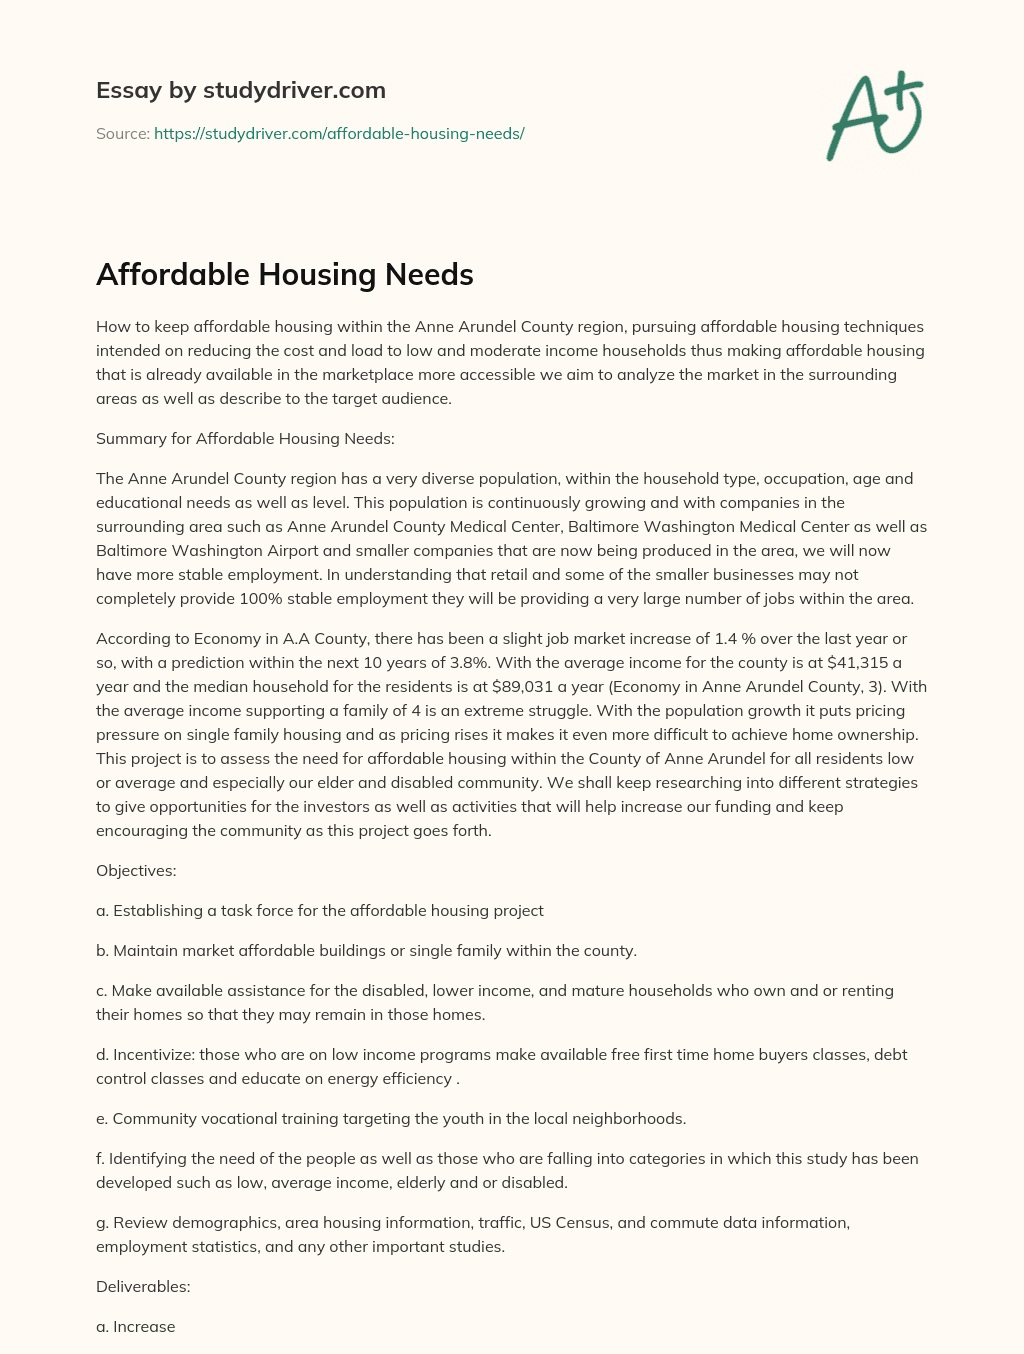 Affordable Housing Needs essay